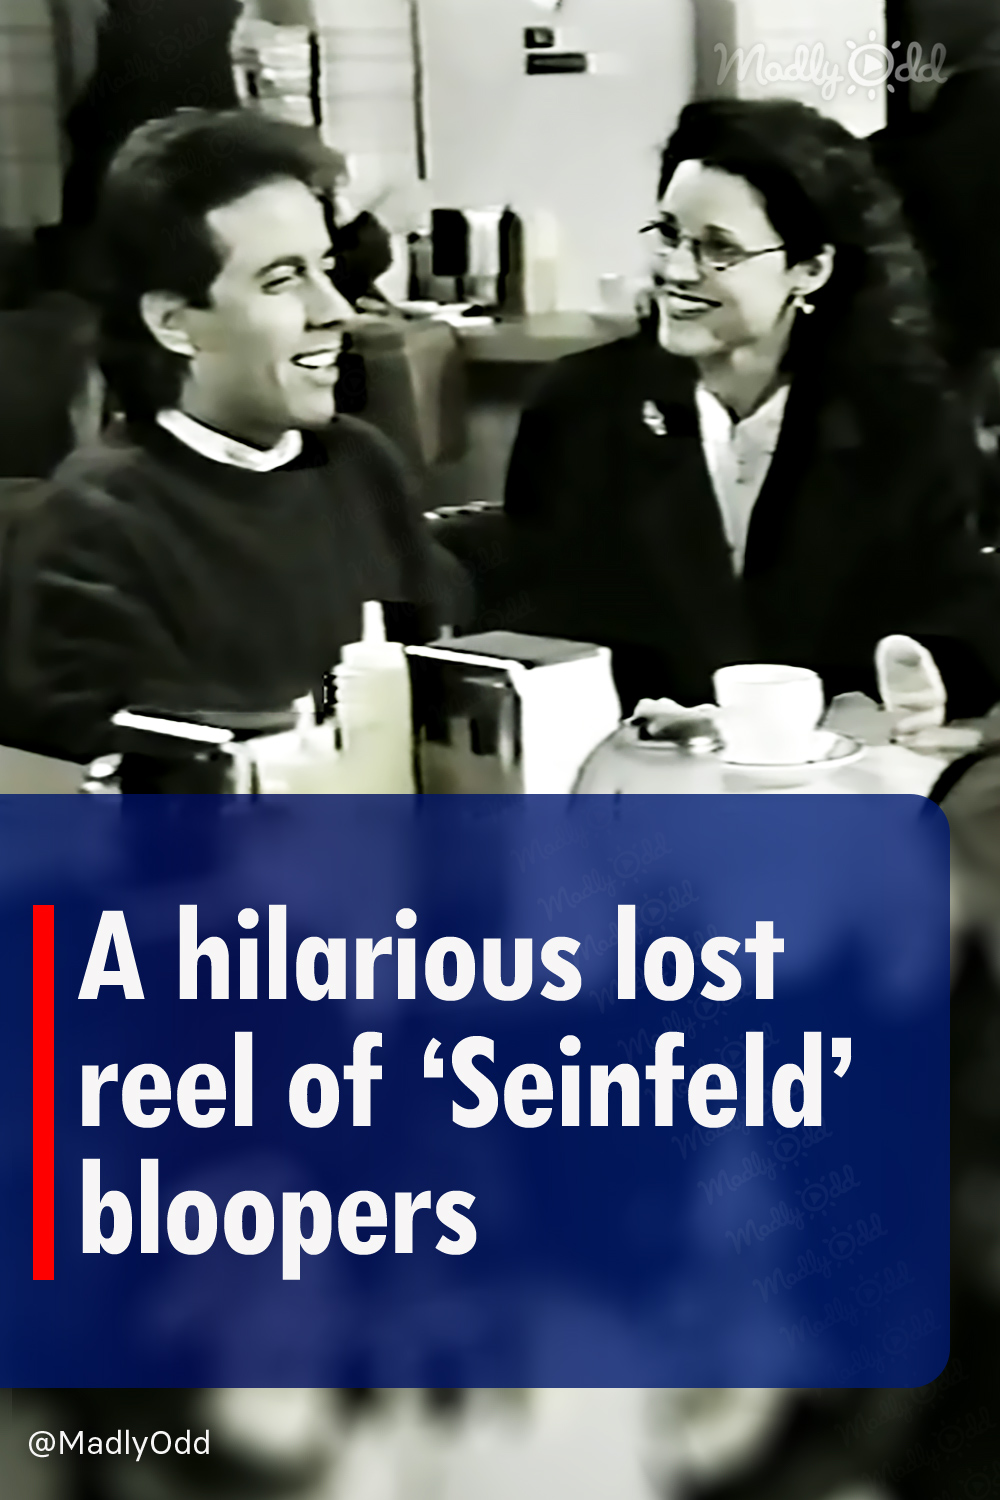 A hilarious lost reel of ‘Seinfeld’ bloopers